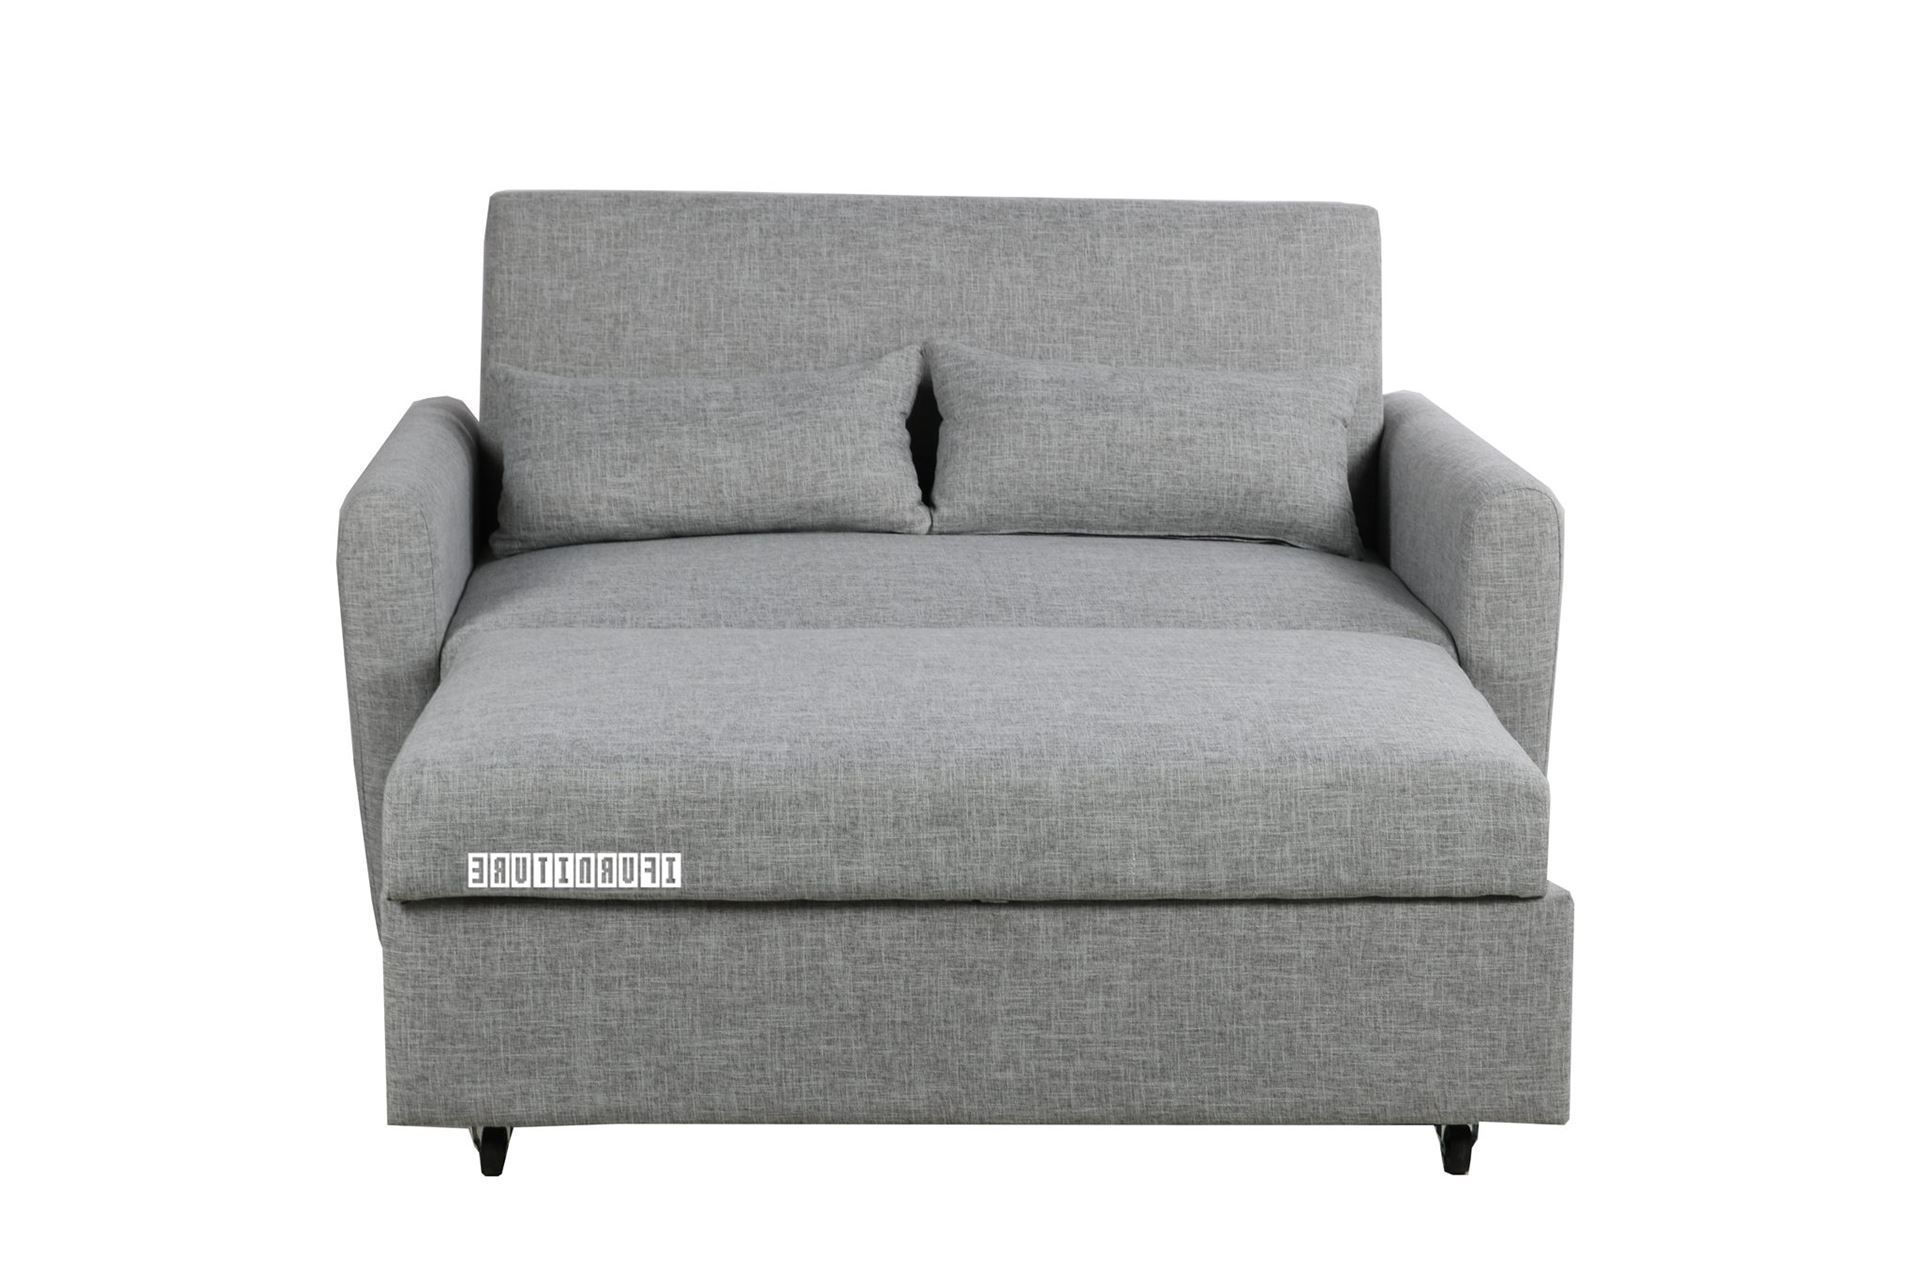 Primo Pull Out 2 Seater Sofa Bed (grey) Pertaining To 2 In 1 Gray Pull Out Sofa Beds (Gallery 5 of 20)